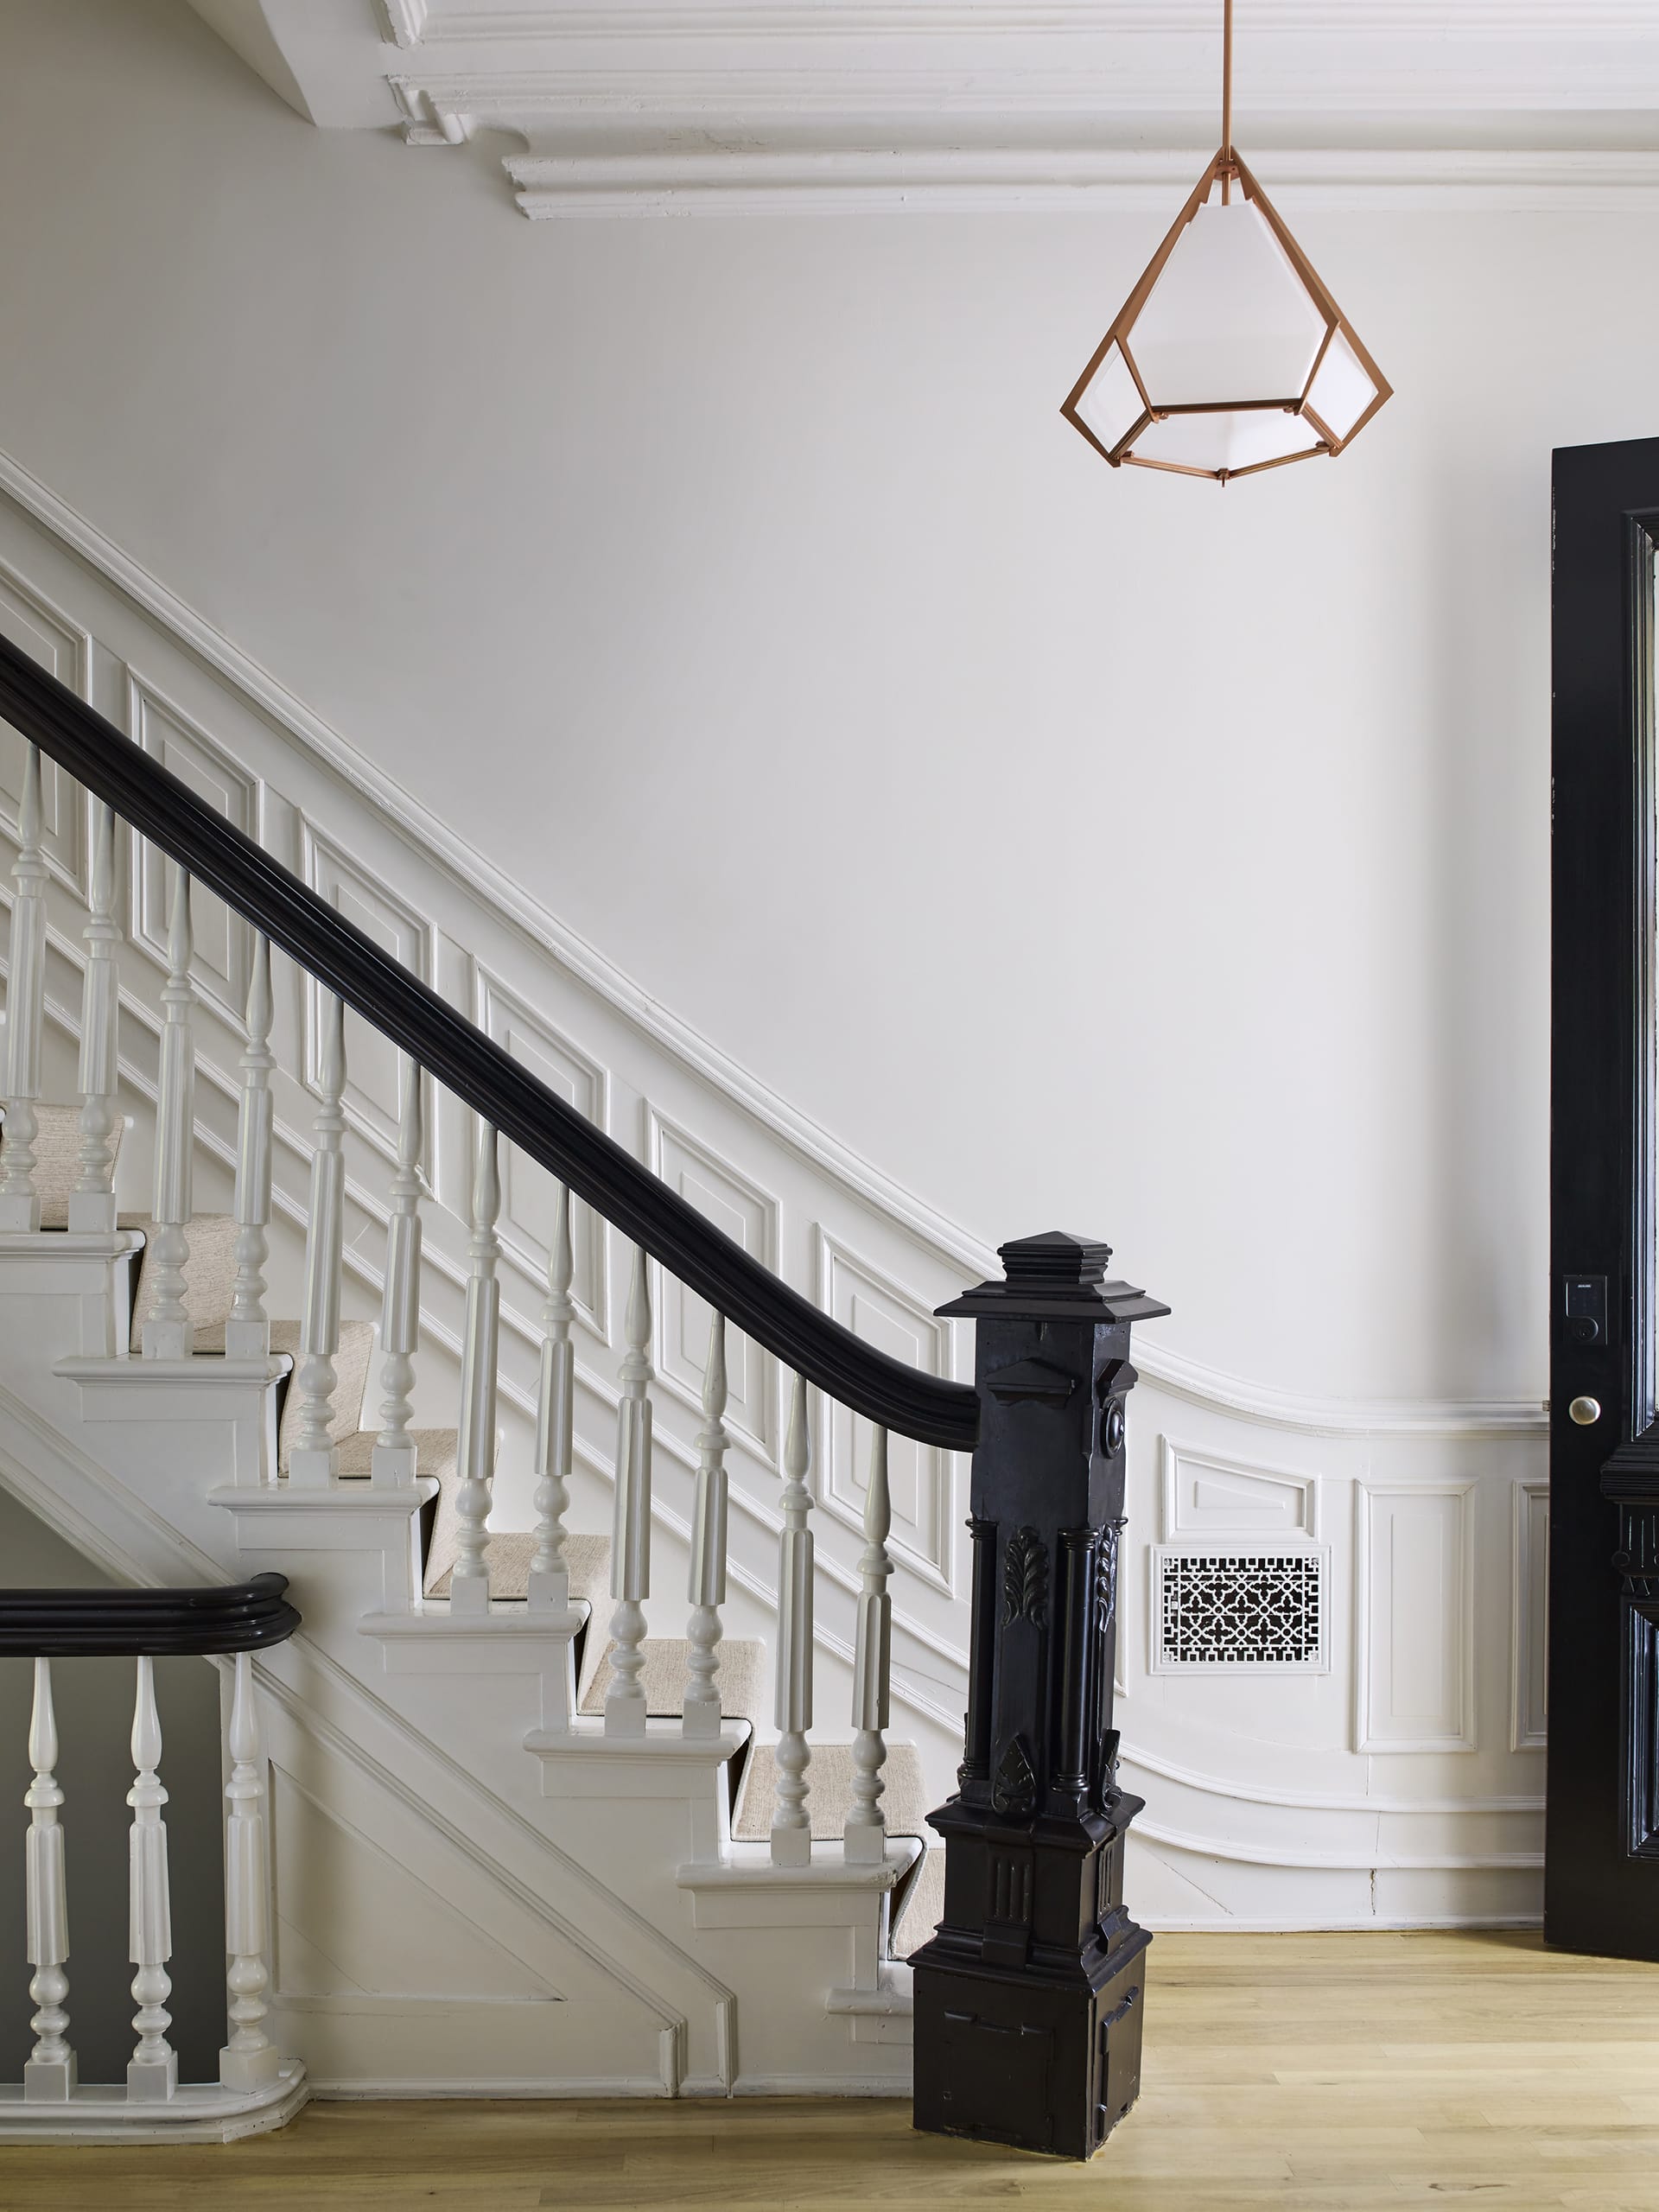 Entryway of a Prospect Heights home with a pendant light and staircase with black newel post and railings and white posts.